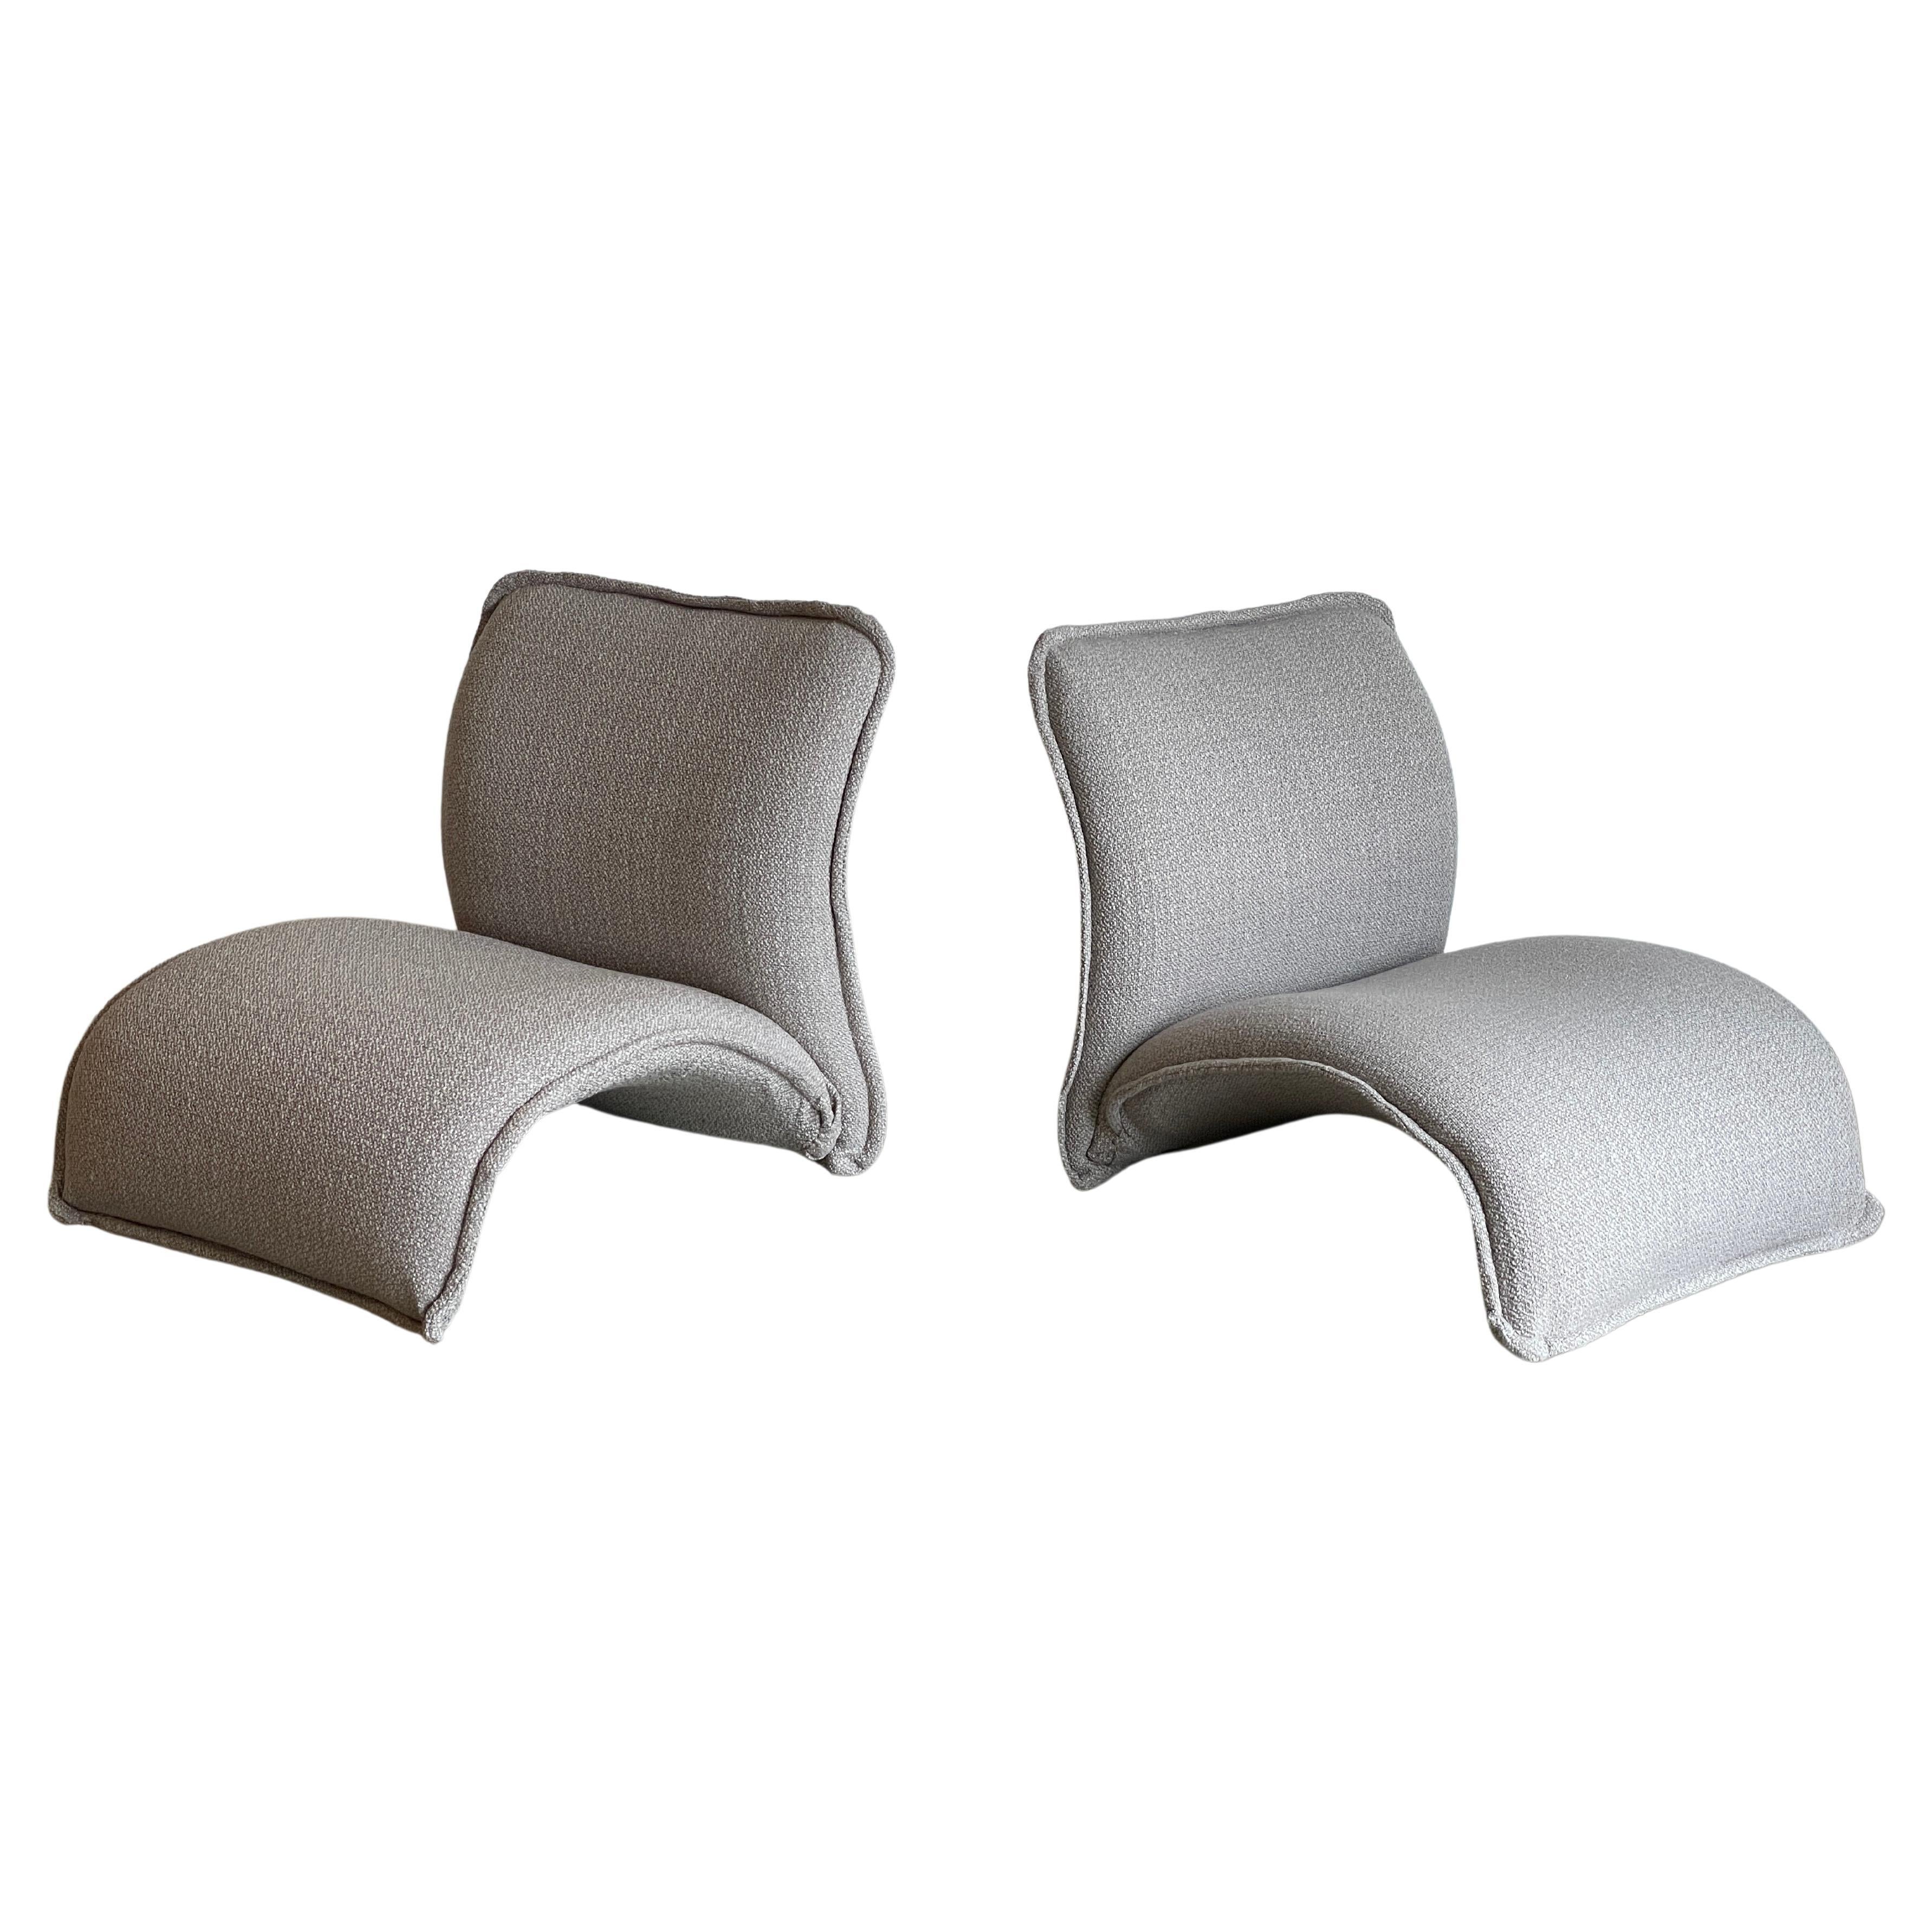 Pair of Newly Upholstered Slipper Chairs